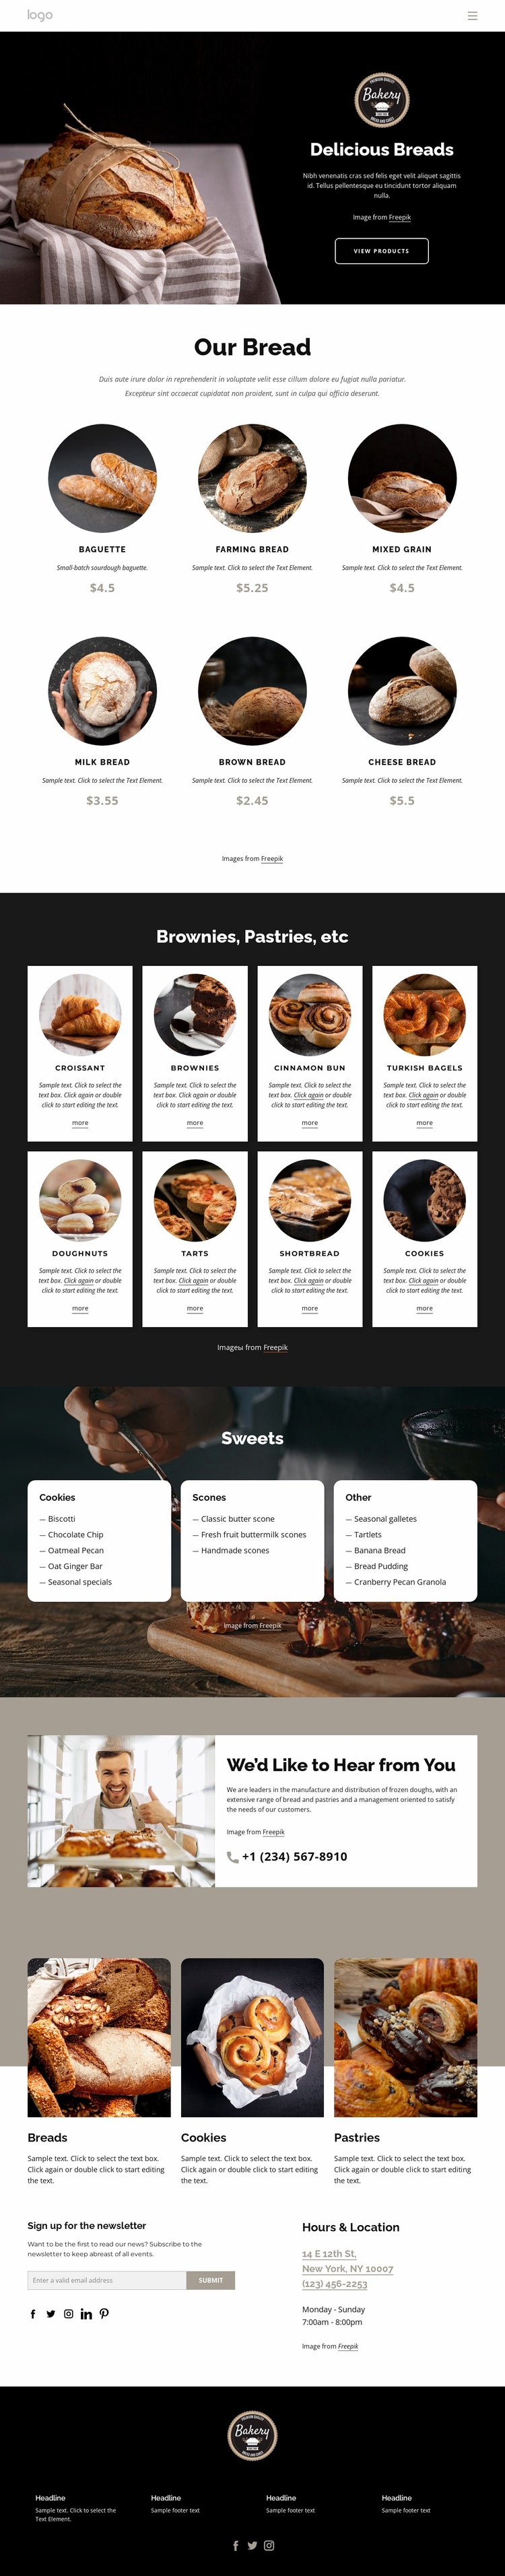 Delicious breads Landing Page